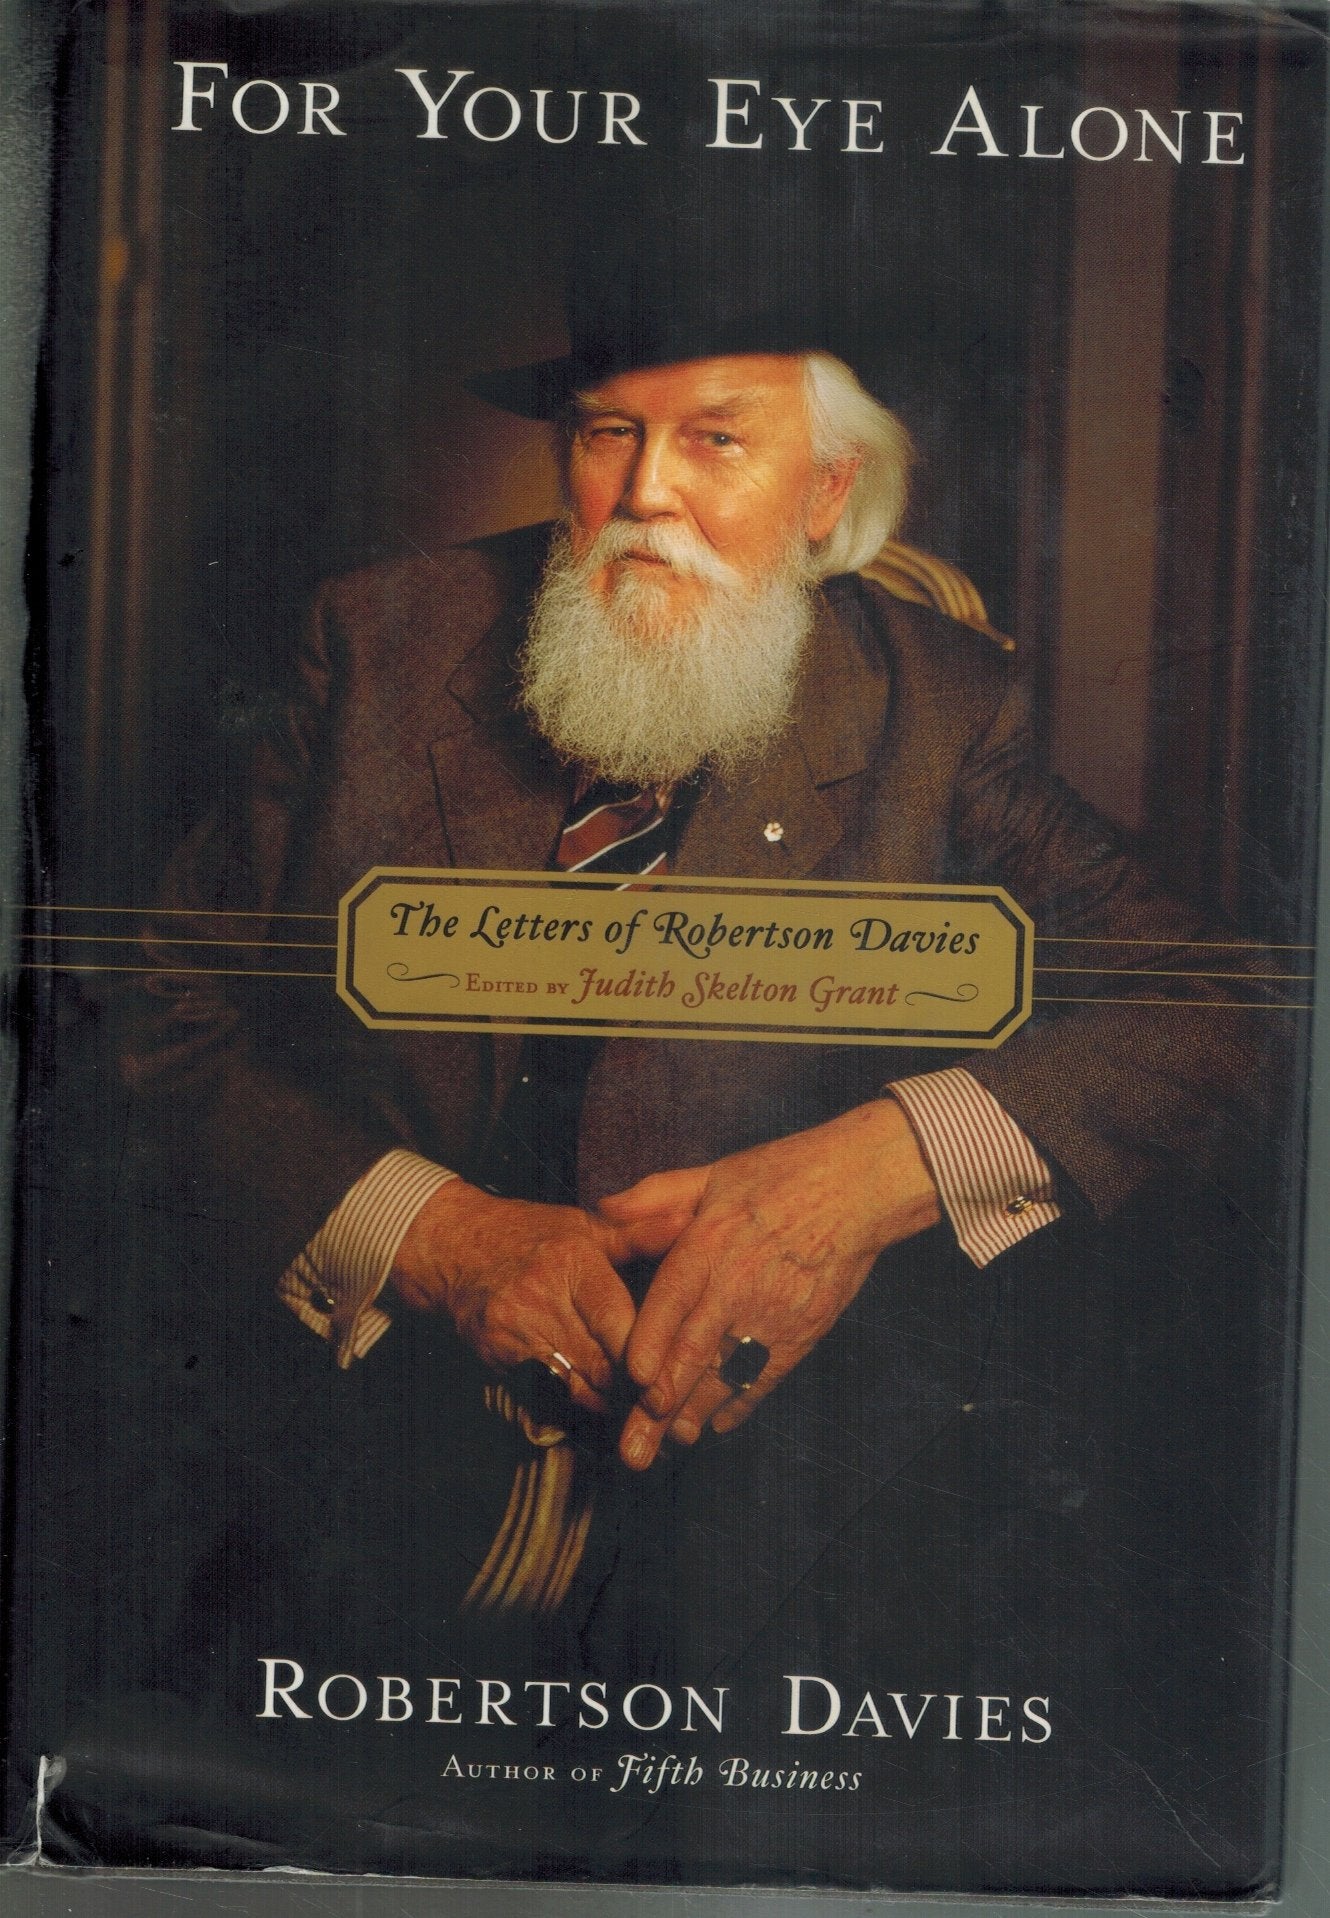 FOR YOUR EYE ALONE: THE LETTERS OF ROBERTSON DAVIES  by Davies, Robertson and Judith Skelton Grant